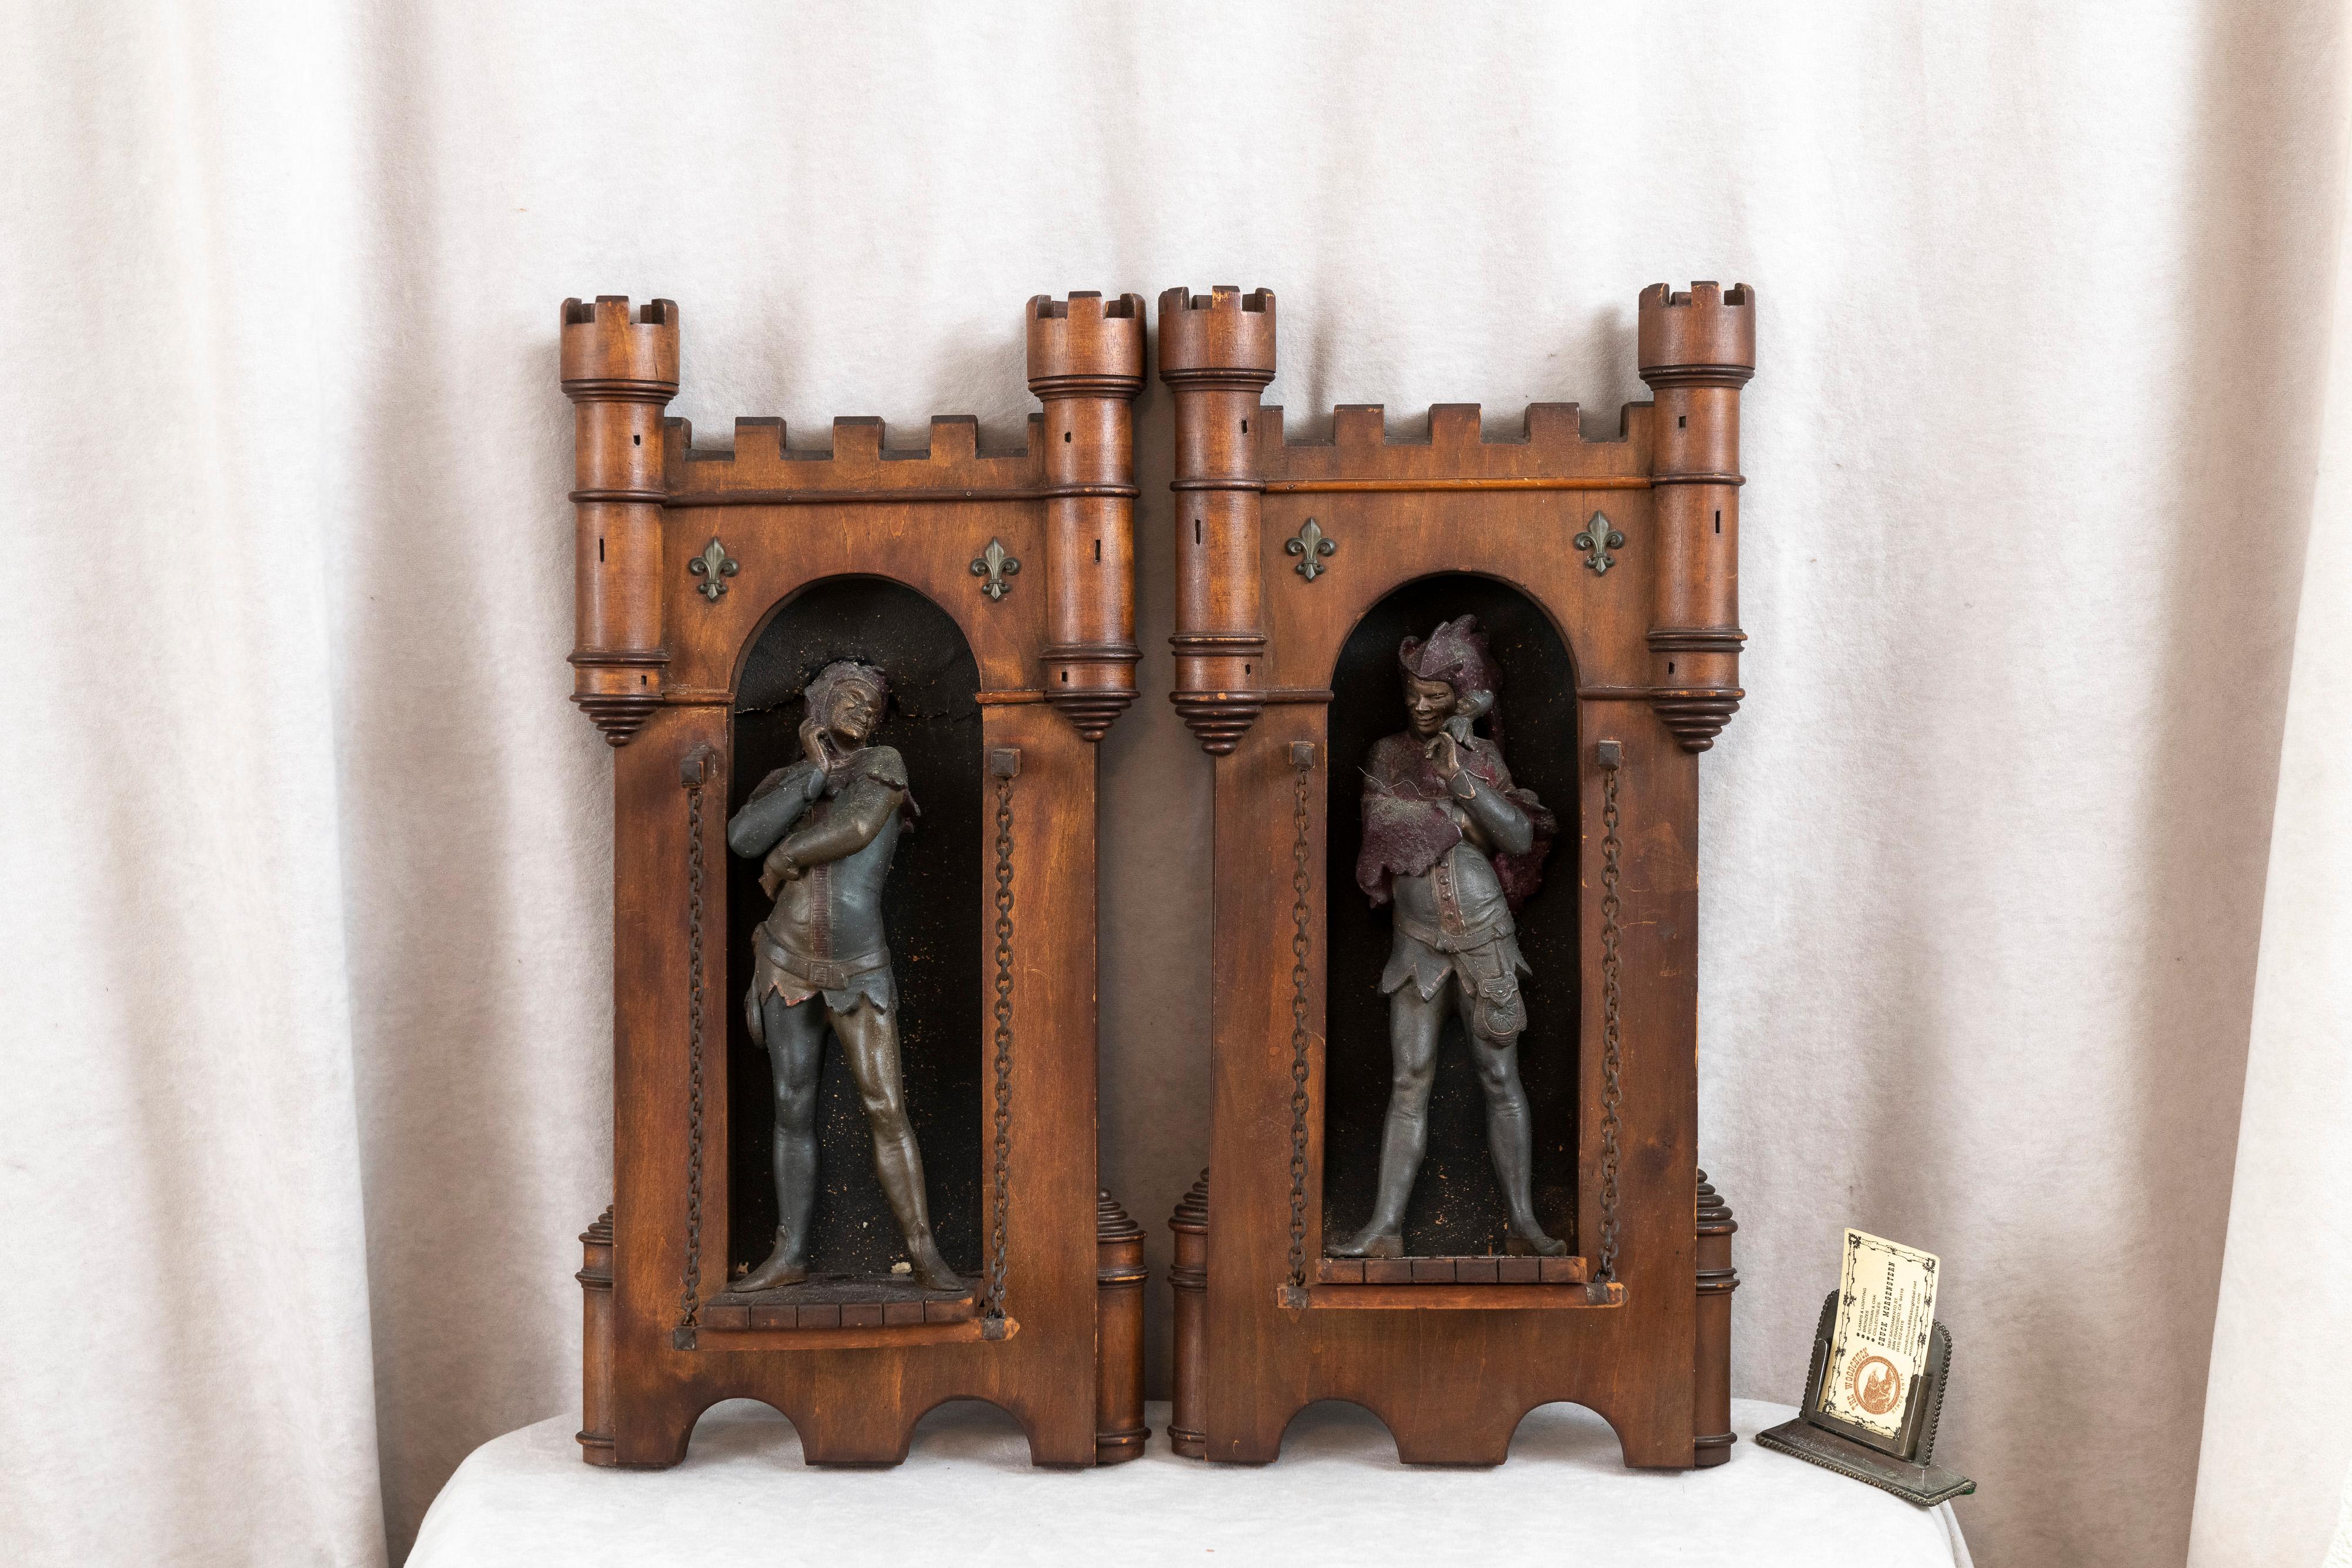 This is not your typical wall hanging art. They are very 3 dimensional, and not resembling plaques, as you can see. We have a nicely carved wood and cast metal medieval scene. The 2 metal figures stand on a carved wood ledge resembling a portion of